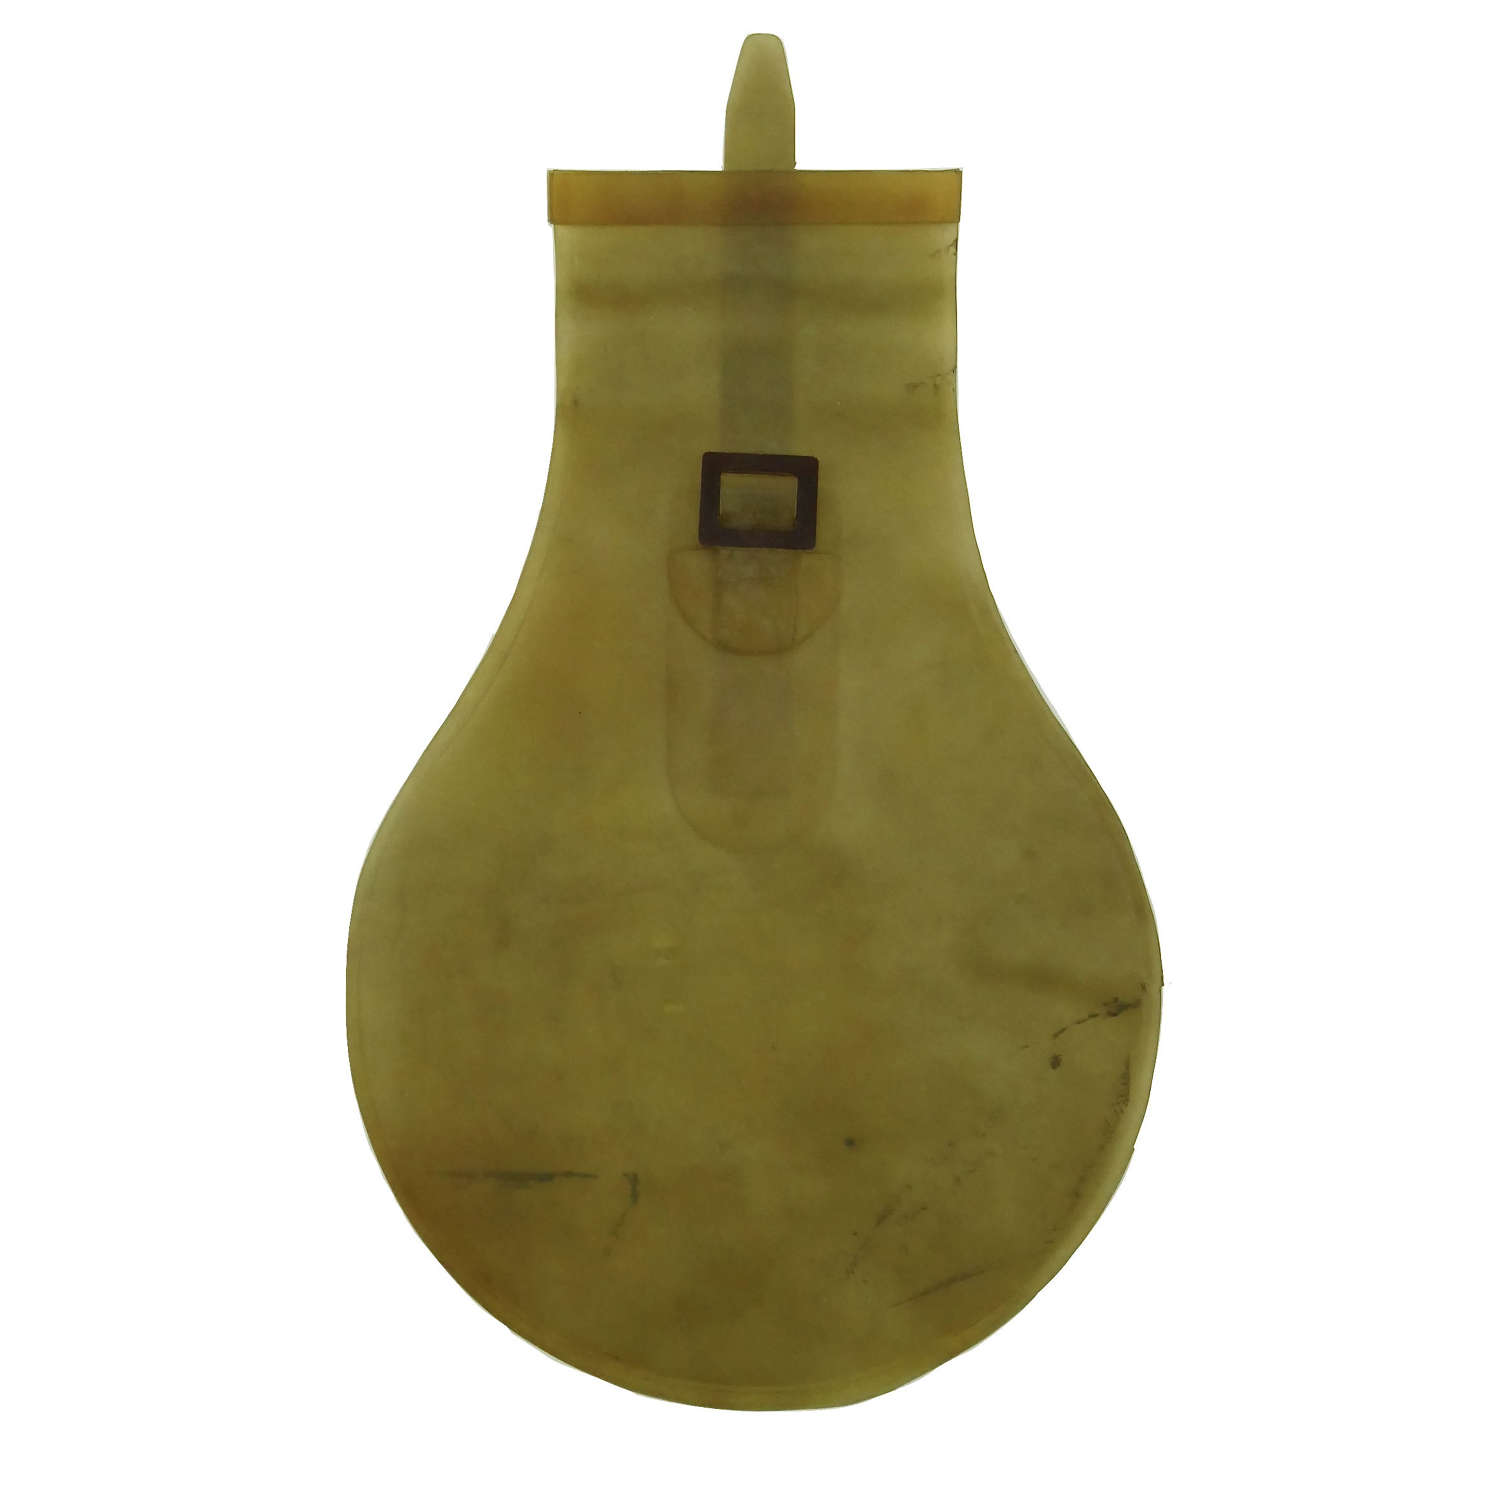 USAAF C-1 survival vest water container